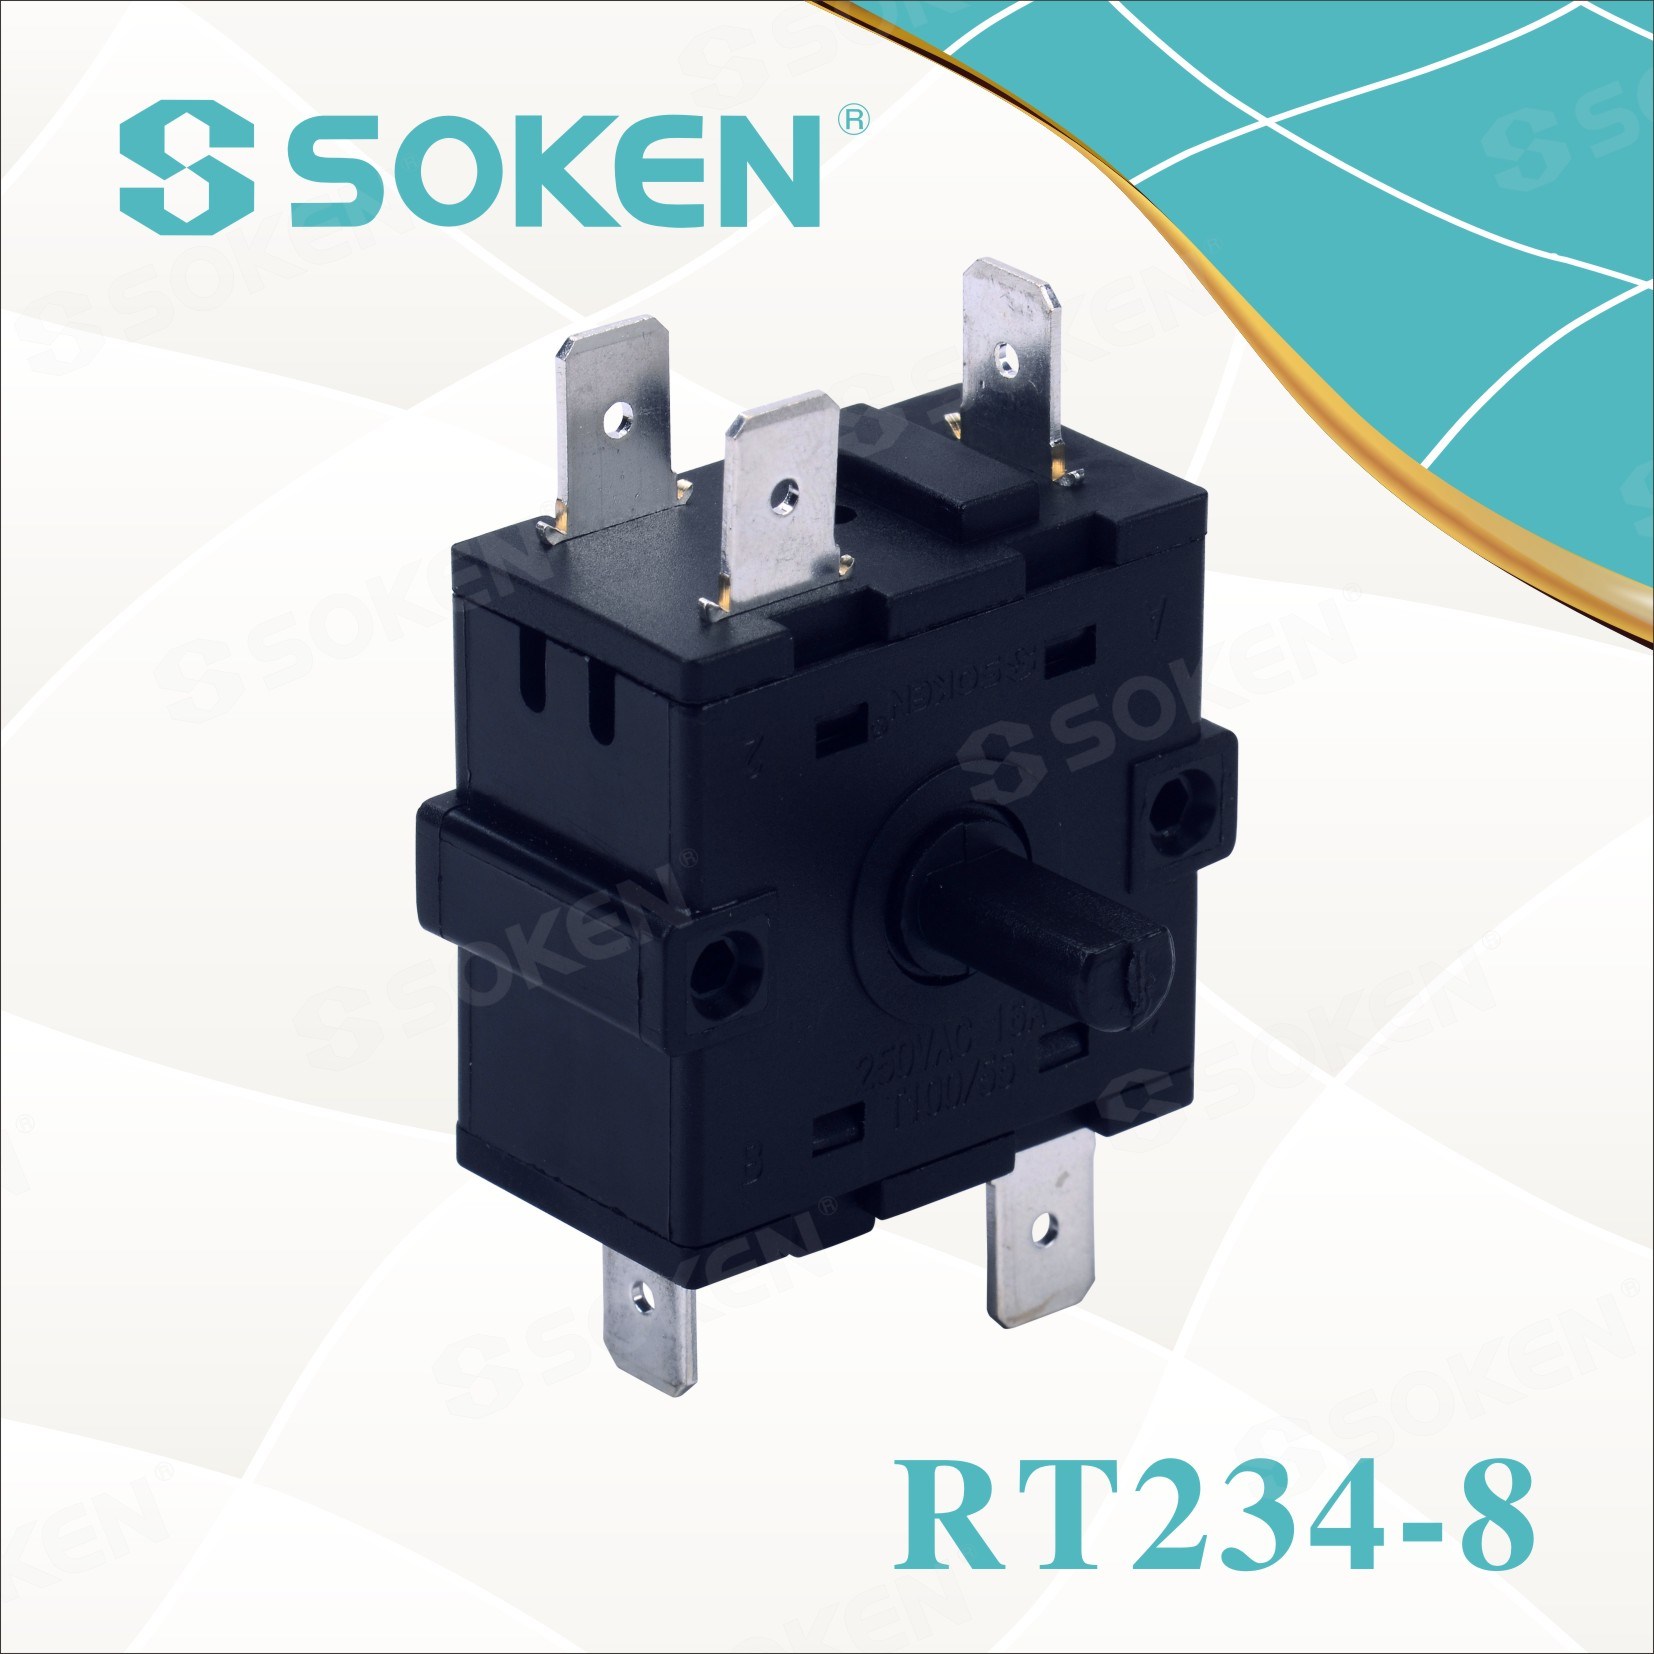 High-Temperature Rotary Switch with 4 Position (RT234-8)